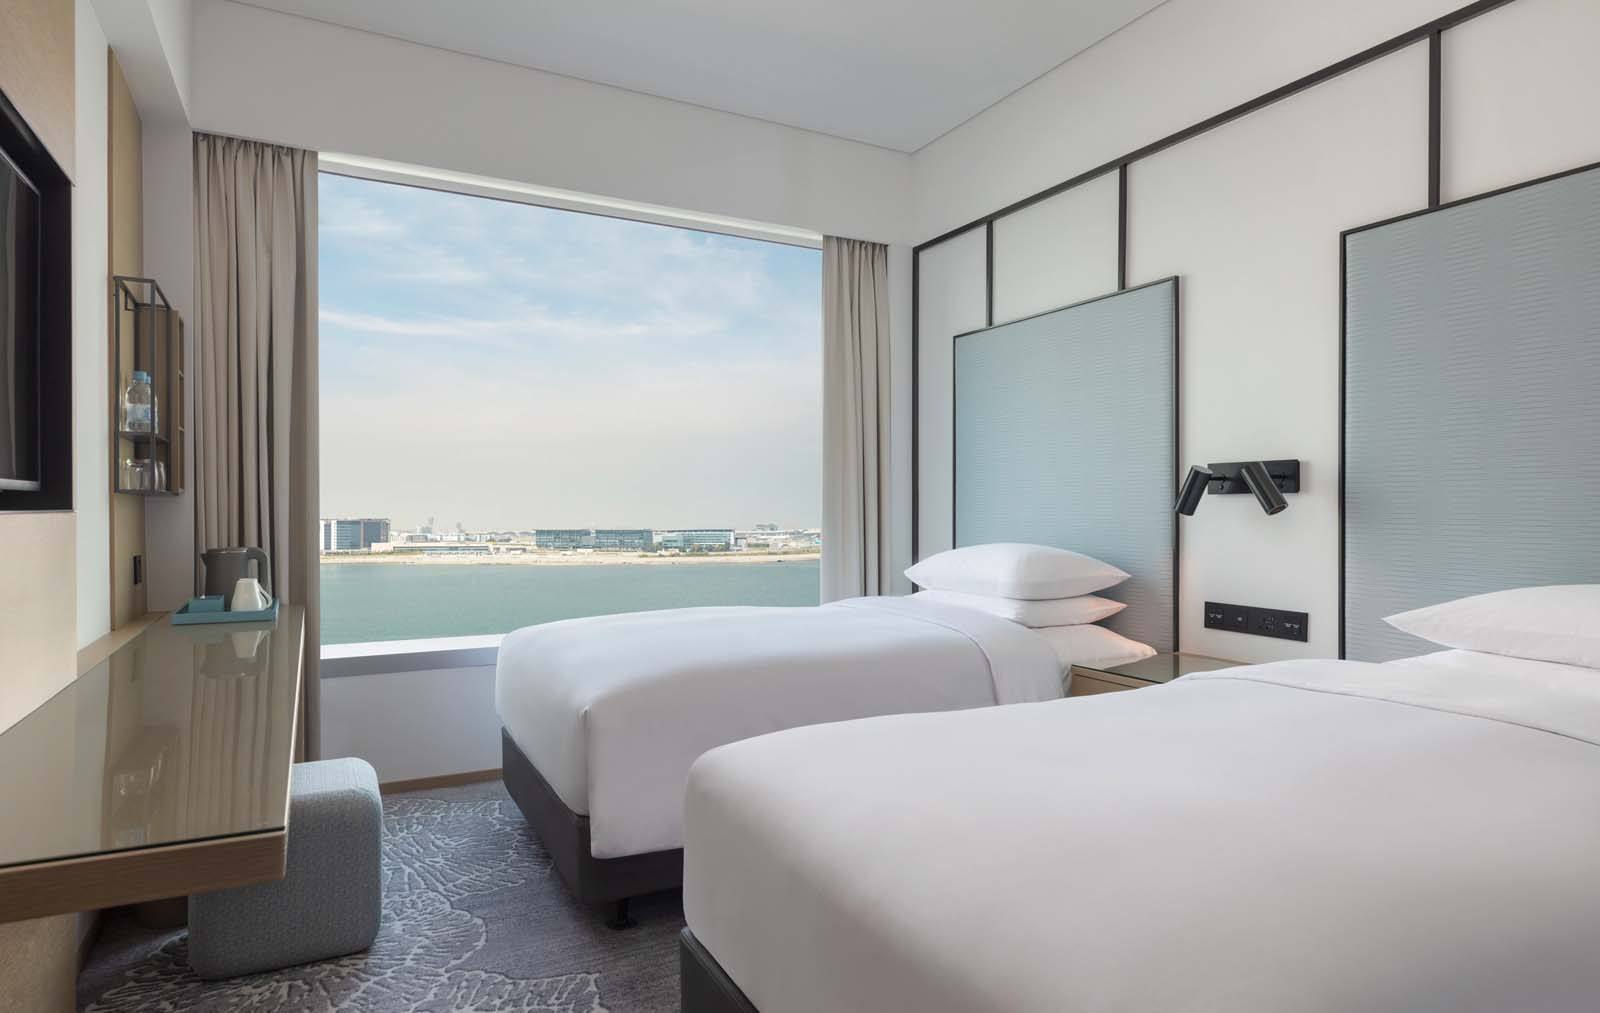 Traditional oceanview twin bedroom at the Four Points by Sheraton hotel in Hong Kong